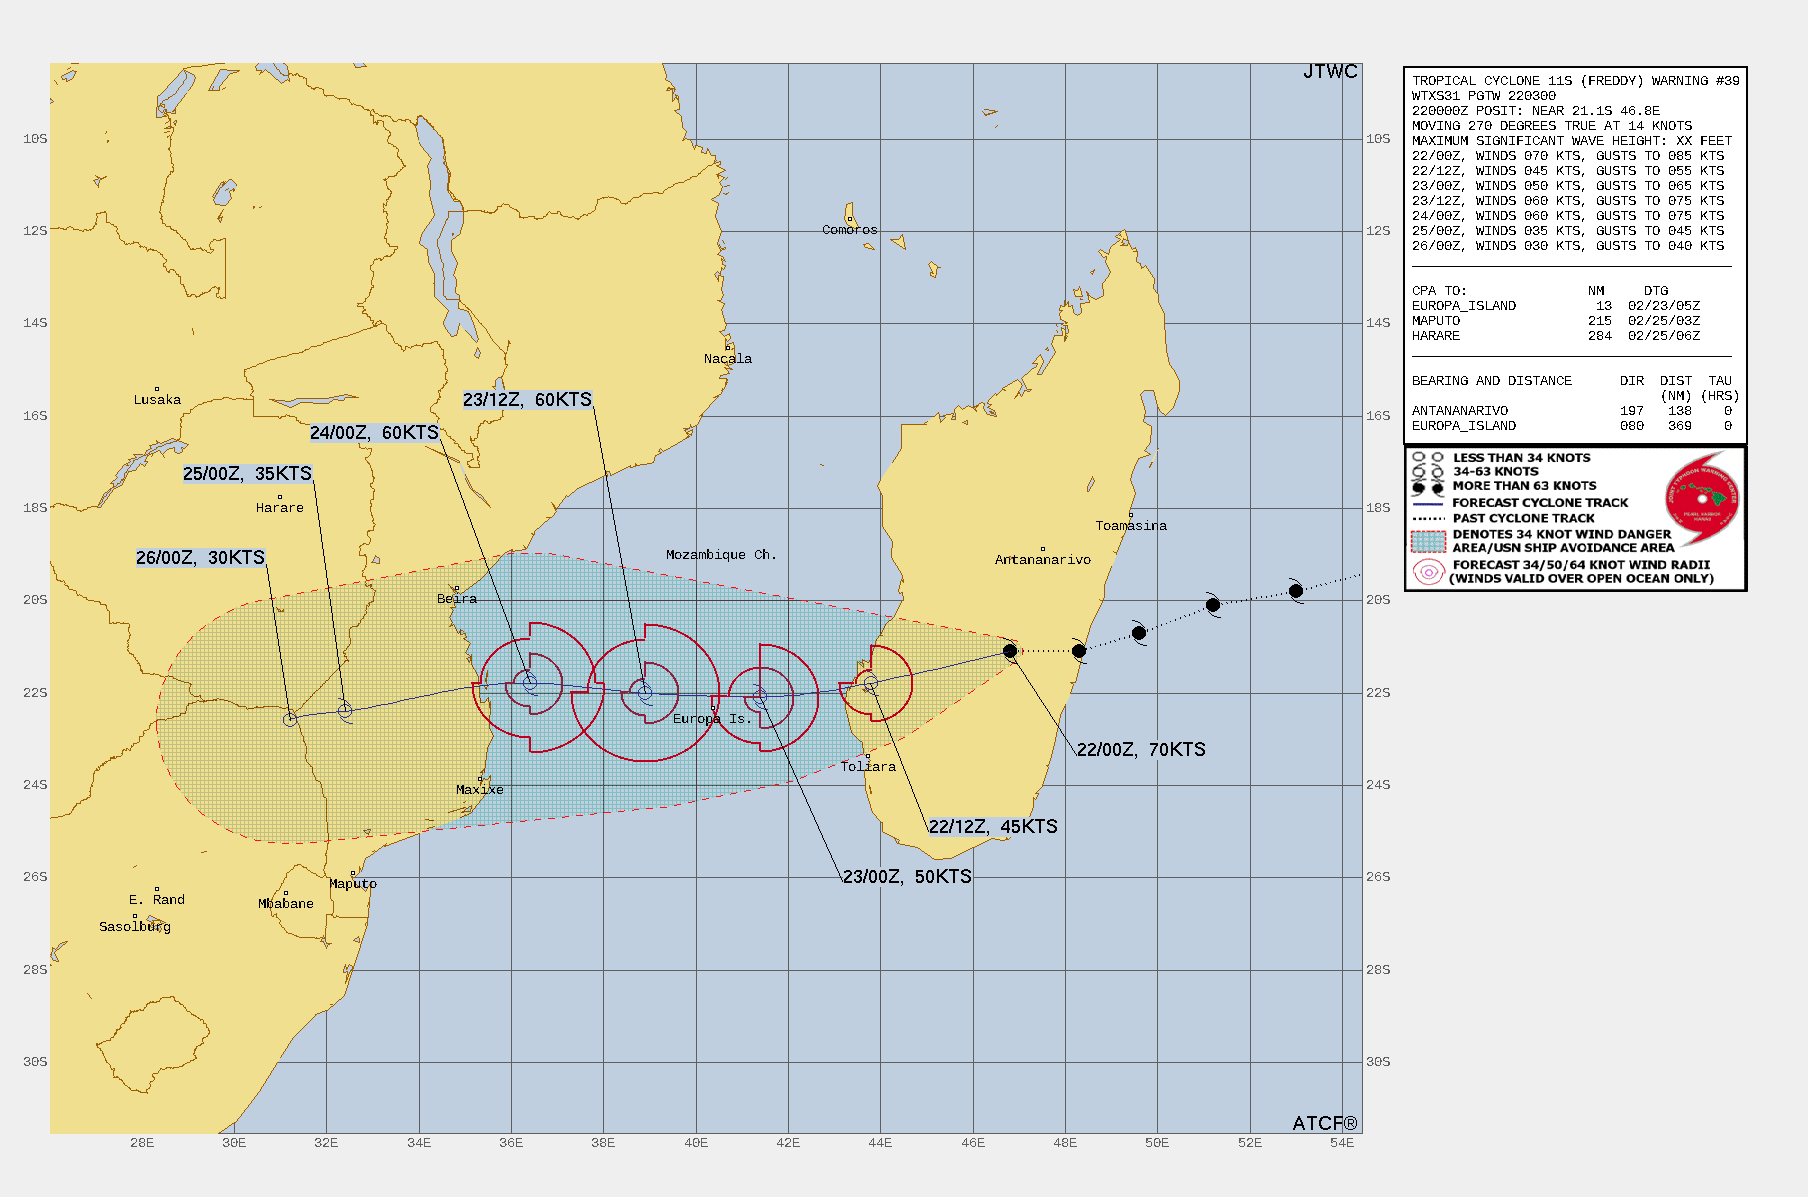 FORECAST REASONING.  SIGNIFICANT FORECAST CHANGES: THERE ARE NO SIGNIFICANT CHANGES TO THE FORECAST FROM THE PREVIOUS WARNING.  FORECAST DISCUSSION: HAVING MADE LANDFALL APPROXIMATELY SIX HOURS AGO, TC 11S (FREDDY) IS FORECAST TO TRACK GENERALLY WEST SOUTHWESTWARD AS IT IS RIPPED APART BY THE MOUNTAINOUS EASTERN REGION OF MADAGASCAR. THE SYSTEM IS FORECAST TO WEAKEN TO AROUND 45KTS OVER THE NEXT 12 HOURS AS IT APPROACHES THE MOZAMBIQUE CHANNEL. THOUGH THE SYSTEM HAS GOOD ATMOSPHERIC SUPPORT, CHARACTERIZED BY LOW VERTICAL WIND SHEAR (VWS) AND MODERATE OUTFLOW ALOFT, THESE ELEMENTS PALE IN COMPARISON TO THE NEGATIVE EFFECTS OF LAND INTERACTION. AFTER TAU 12, THE SYSTEM WILL ENTER THE MOZAMBIQUE CHANNEL AND BY TAU 36, 11S IS FORECAST TO REACH ITS FIFTH AND FINAL PEAK INTENSITY OF AROUND 60KTS. AS THE STR TO THE SOUTH CONTINUES TO BUILD, 11S WILL BE FORCED WESTWARD MAKING LANDFALL AFTER TAU 48 AND QUICKLY WEAKENING THROUGH TAU 72. BY TAU 96, AFTER A HISTORIC TRIP OF OVER 5000 NM, TC 11S WILL FINALLY DISSIPATE OVER SOUTH AFRICA.